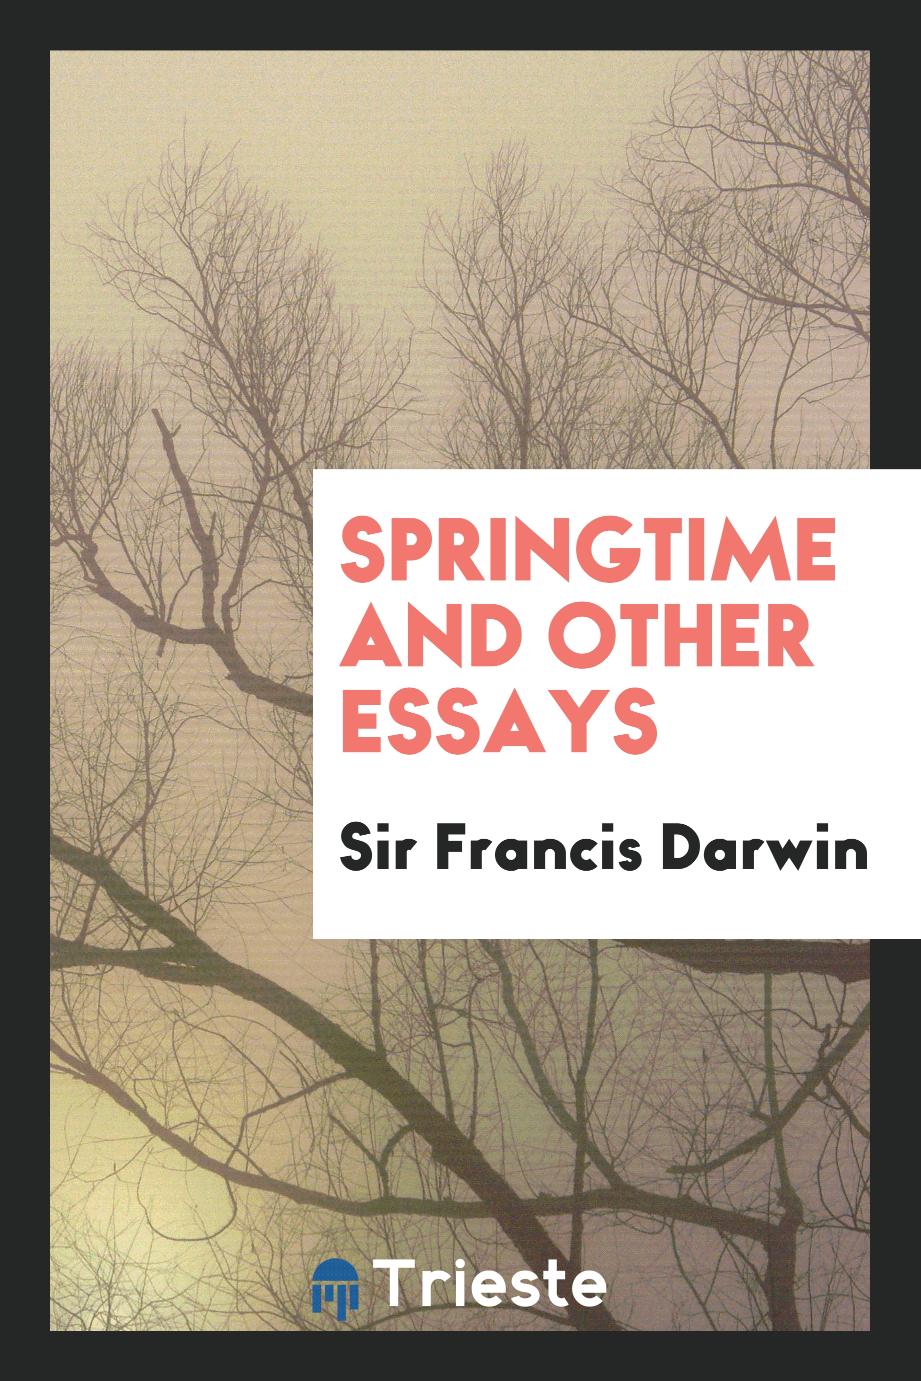 Springtime and other essays